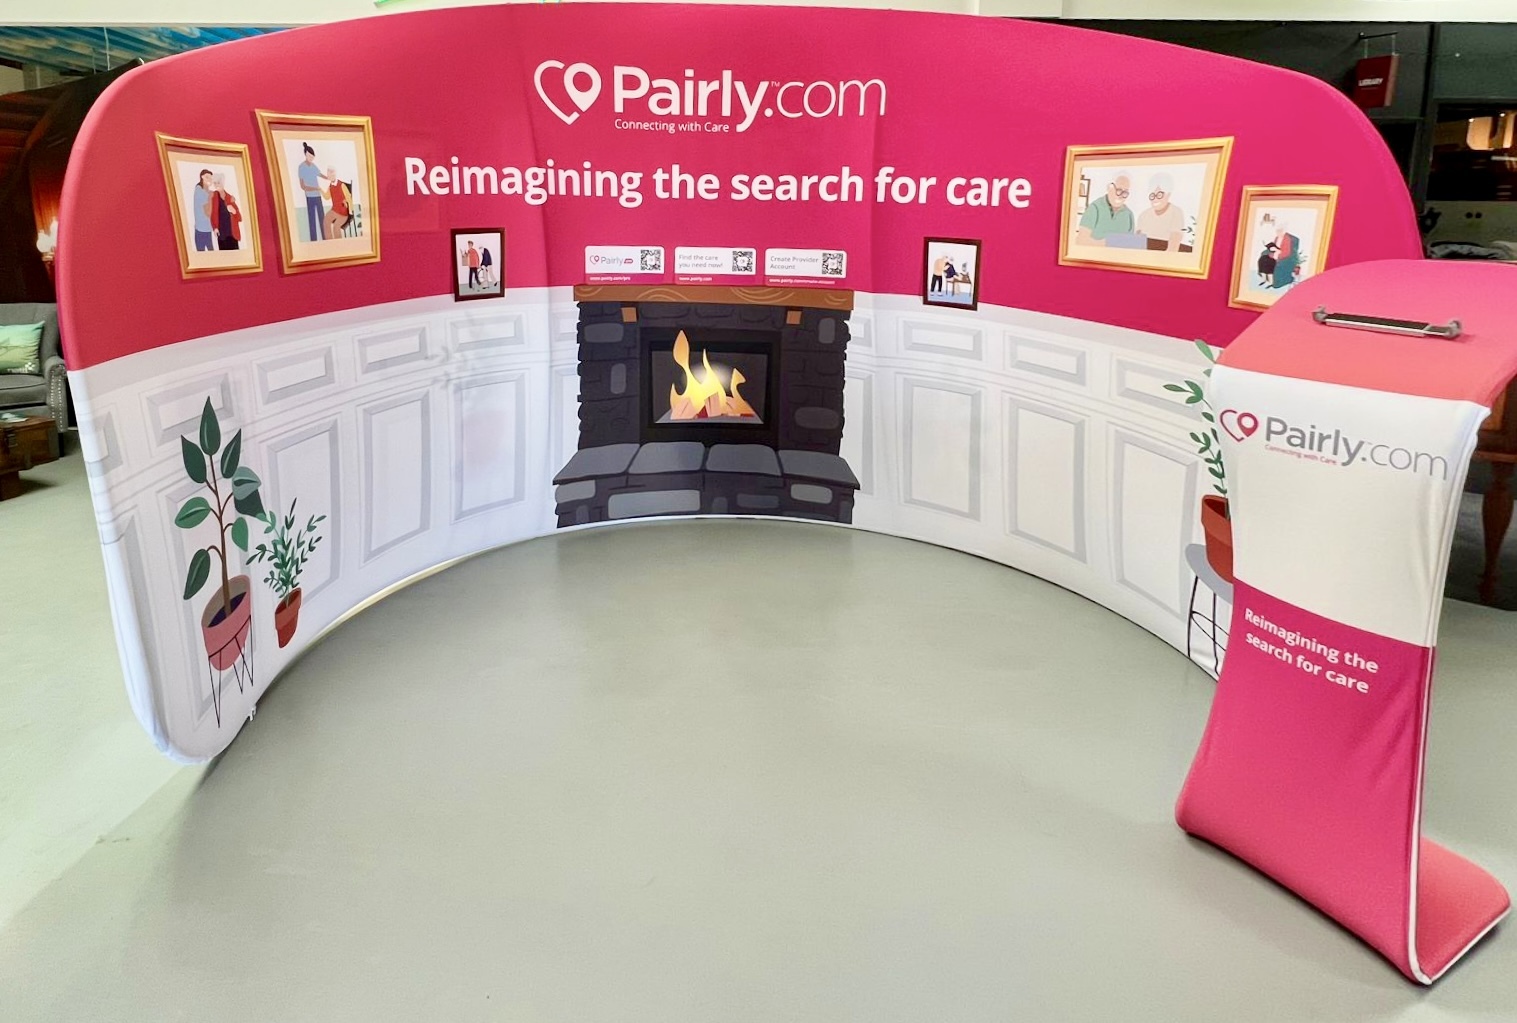 Pairly.com stand for ExCel London Residential and Home Care Show